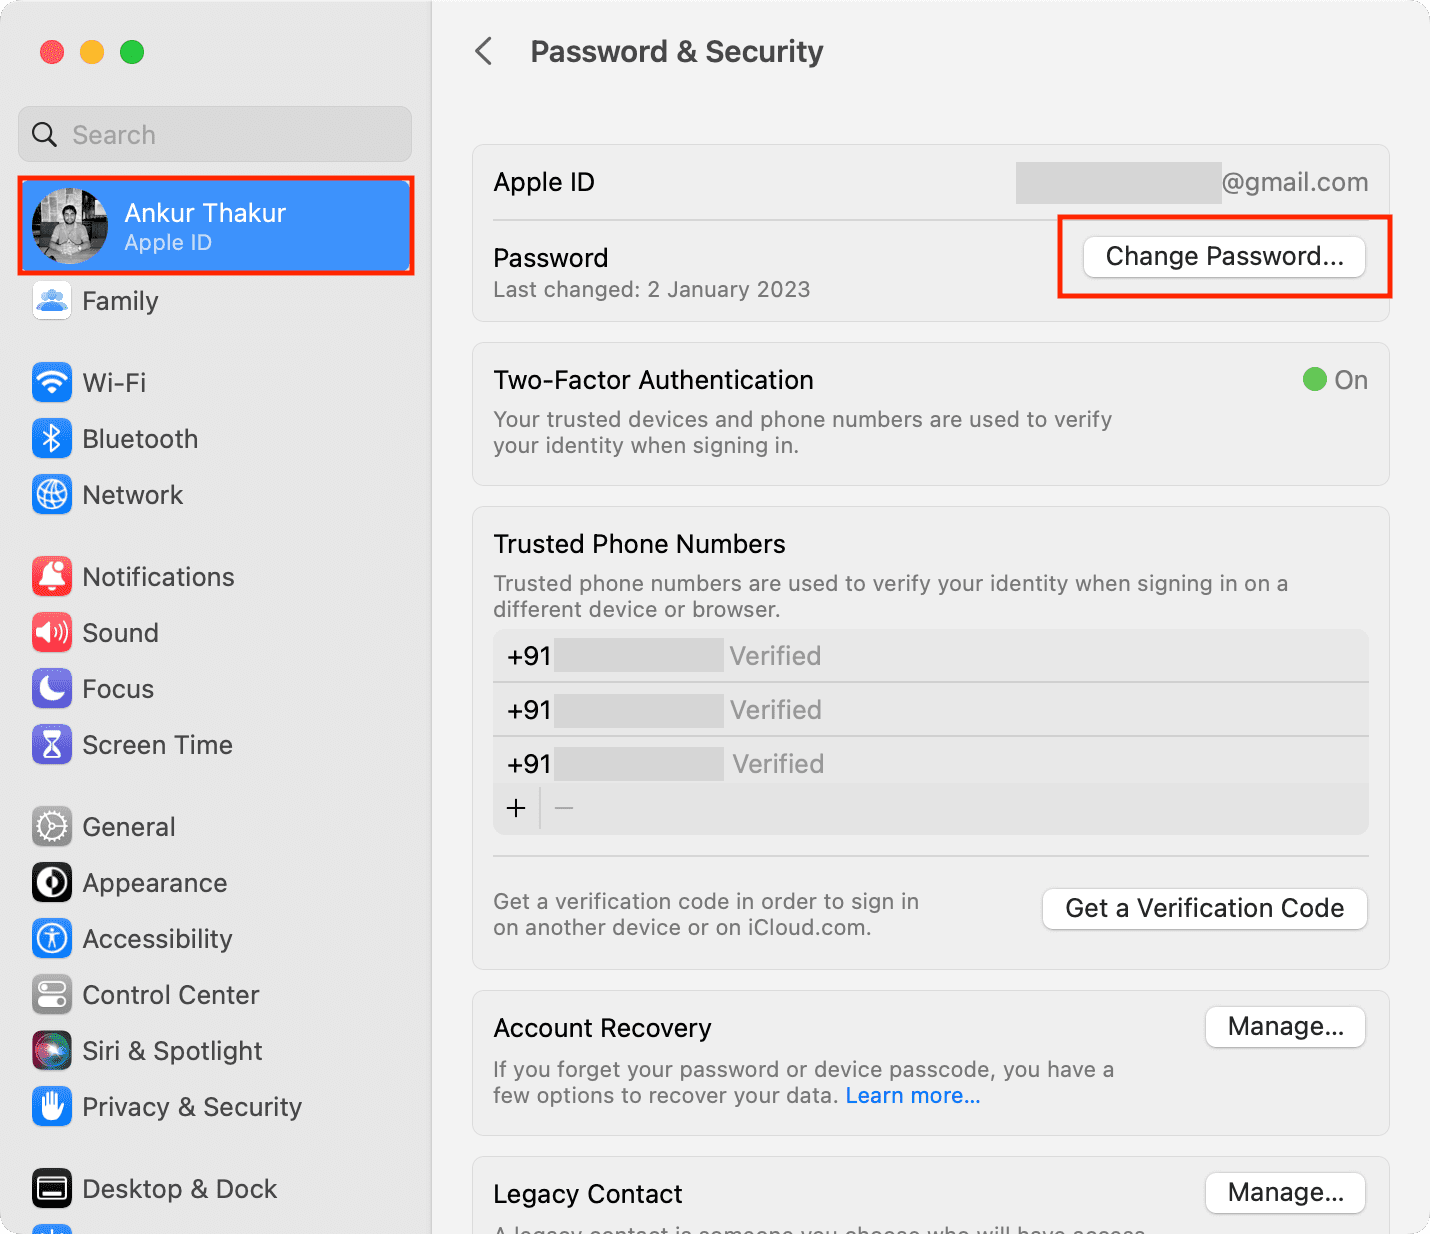 Change Password option for Apple ID in Mac System Settings